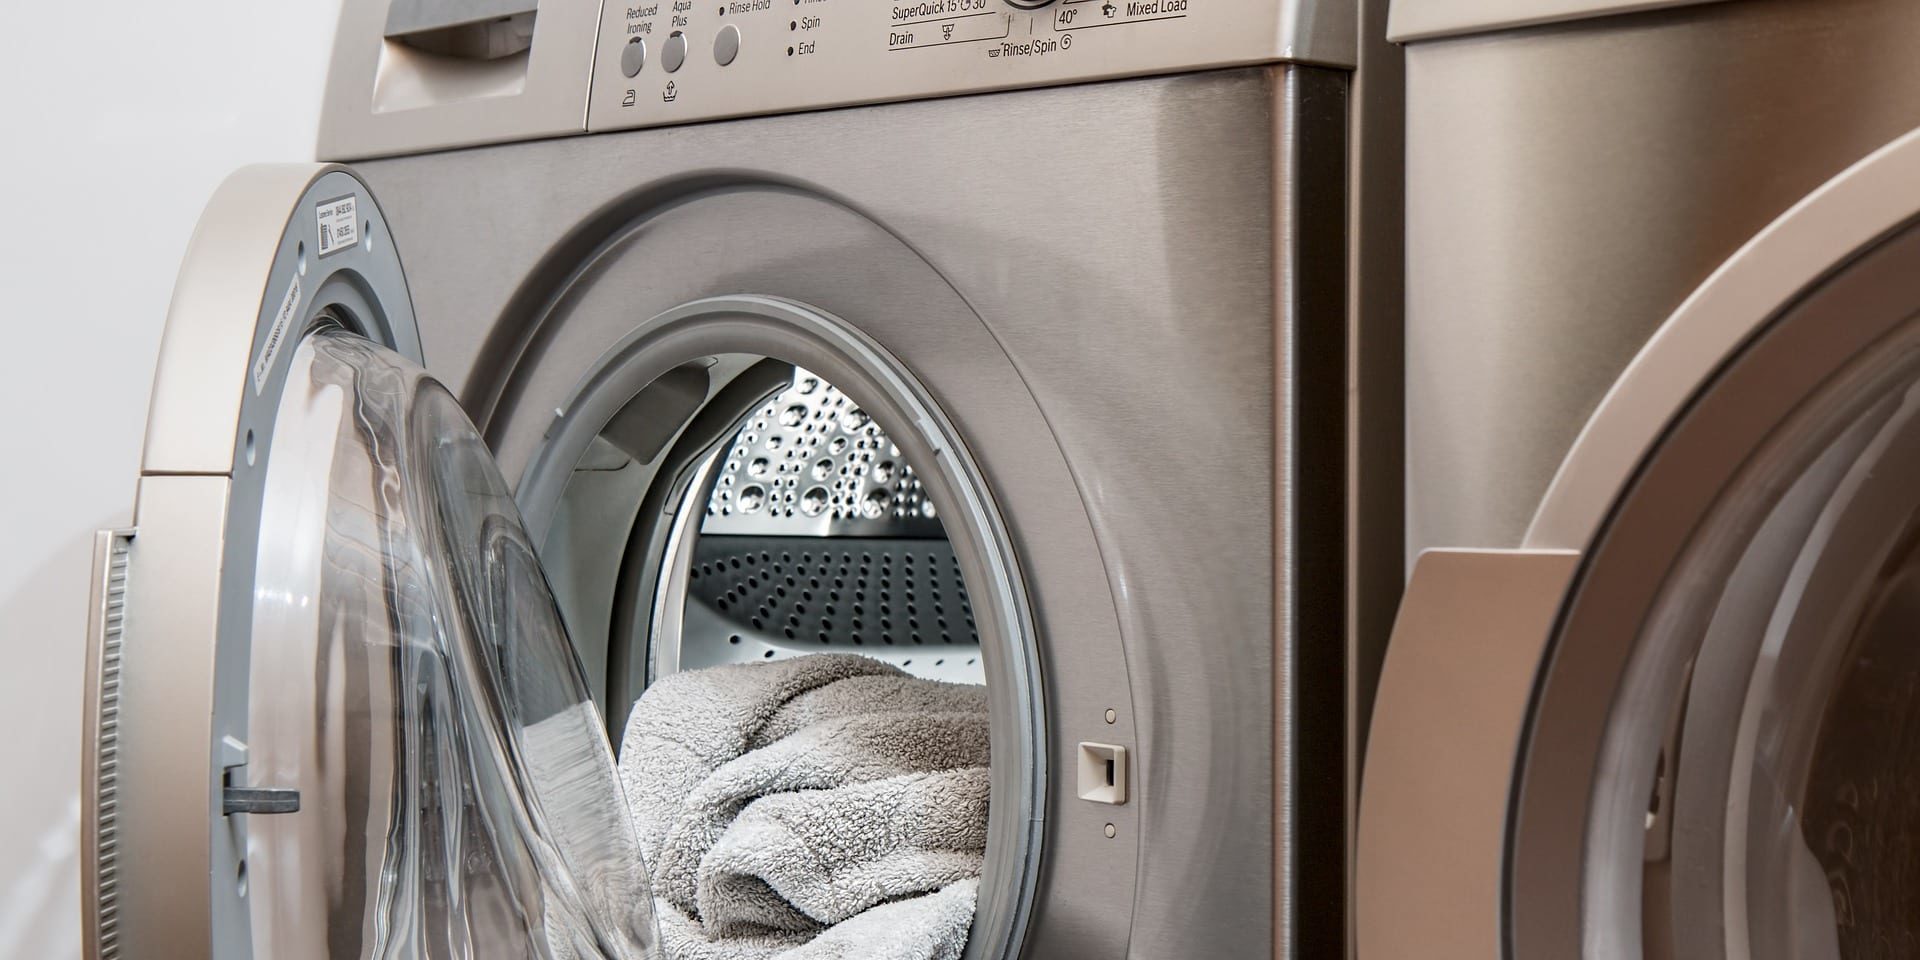 Can You Stack Your Own Washer and Dryer?